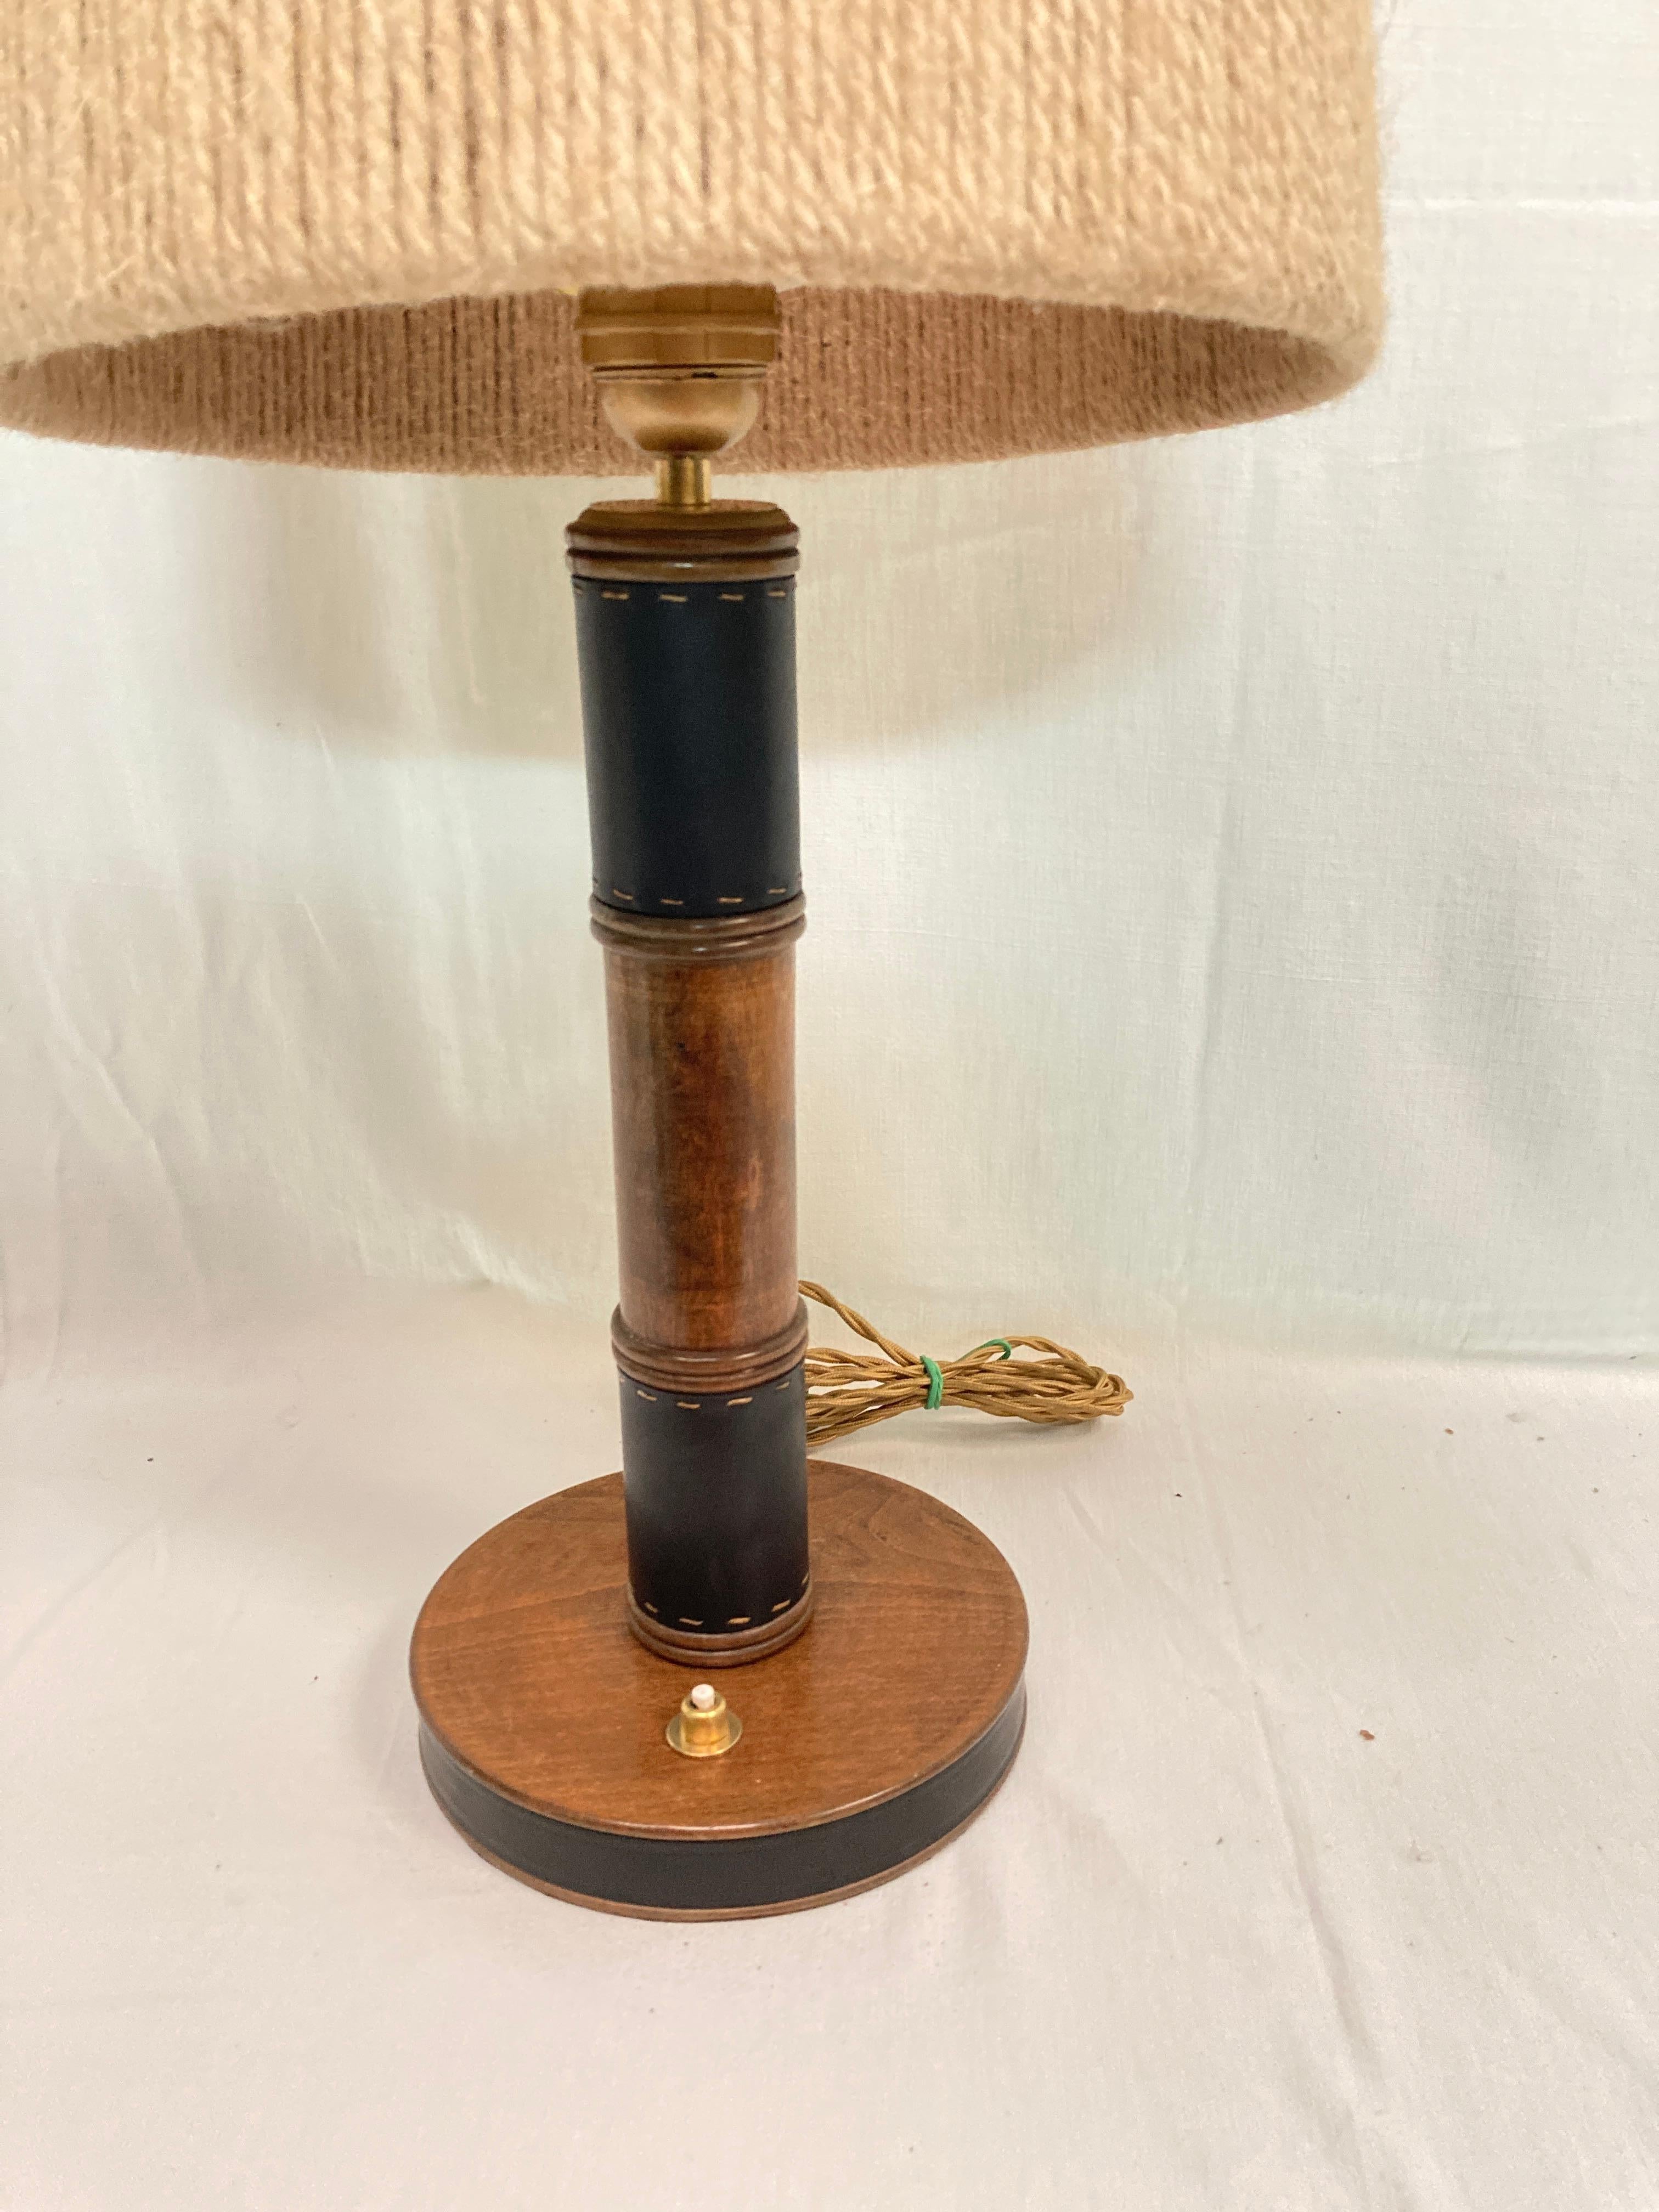 1950's Stitched leather table lamp by Jacques Adnet
France
Dimensions given without shade
No shade included